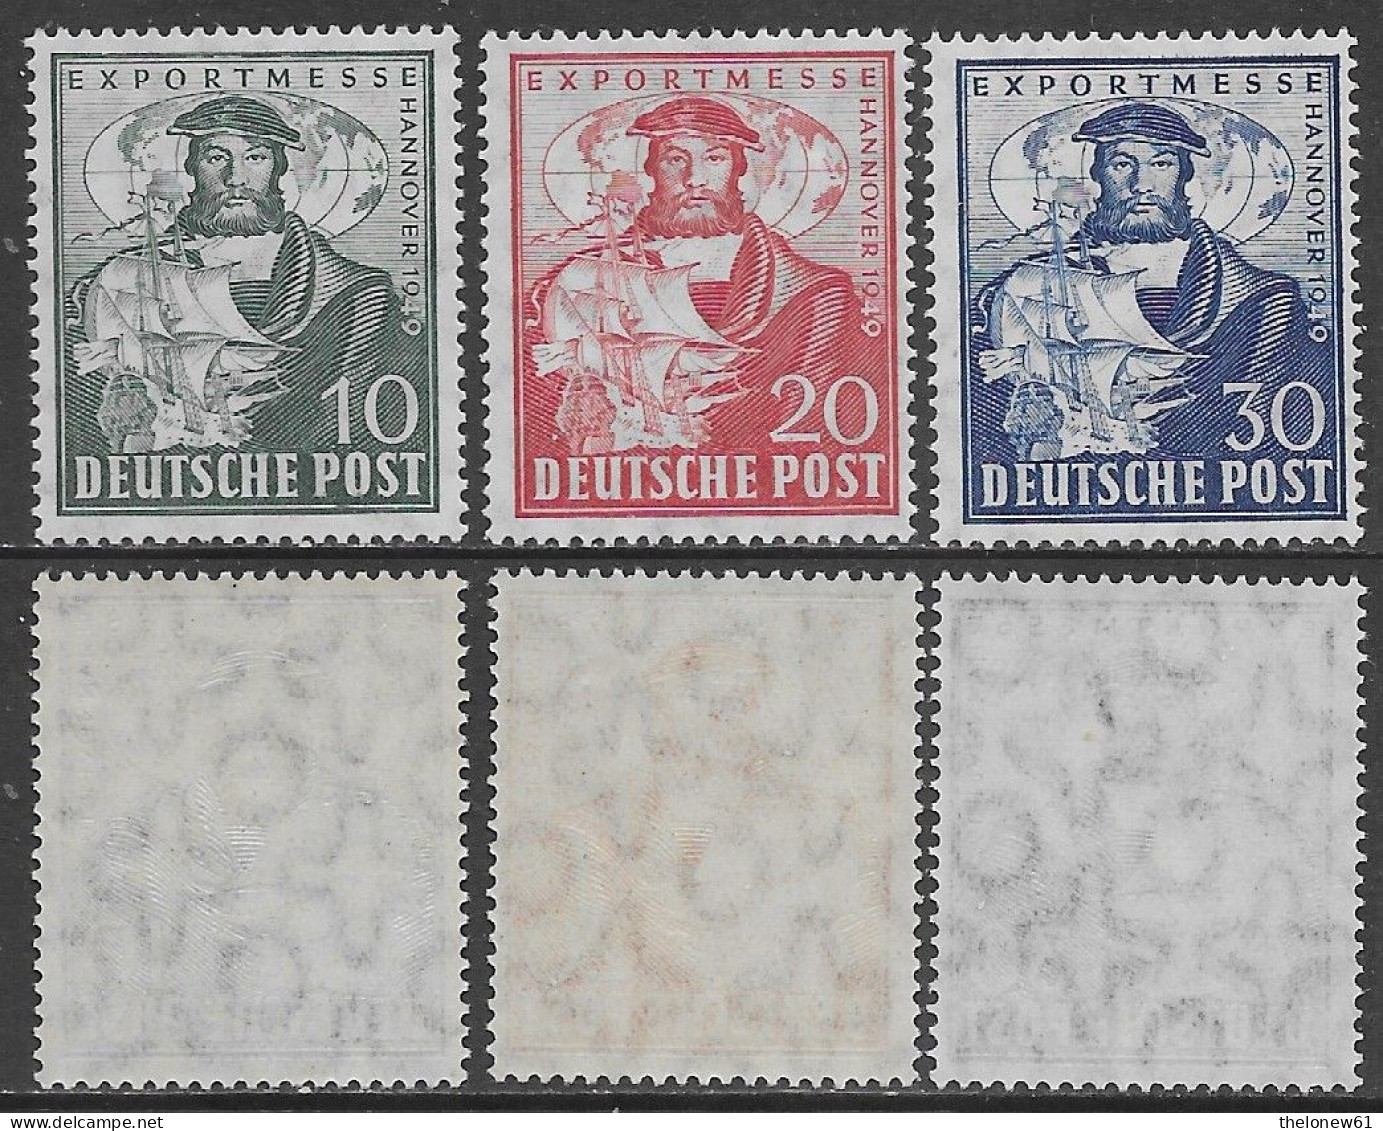 Germania Germany 1949 British American Zone Hannover Export Fair Mi N.103-105 Complete Set MNH ** - Mint